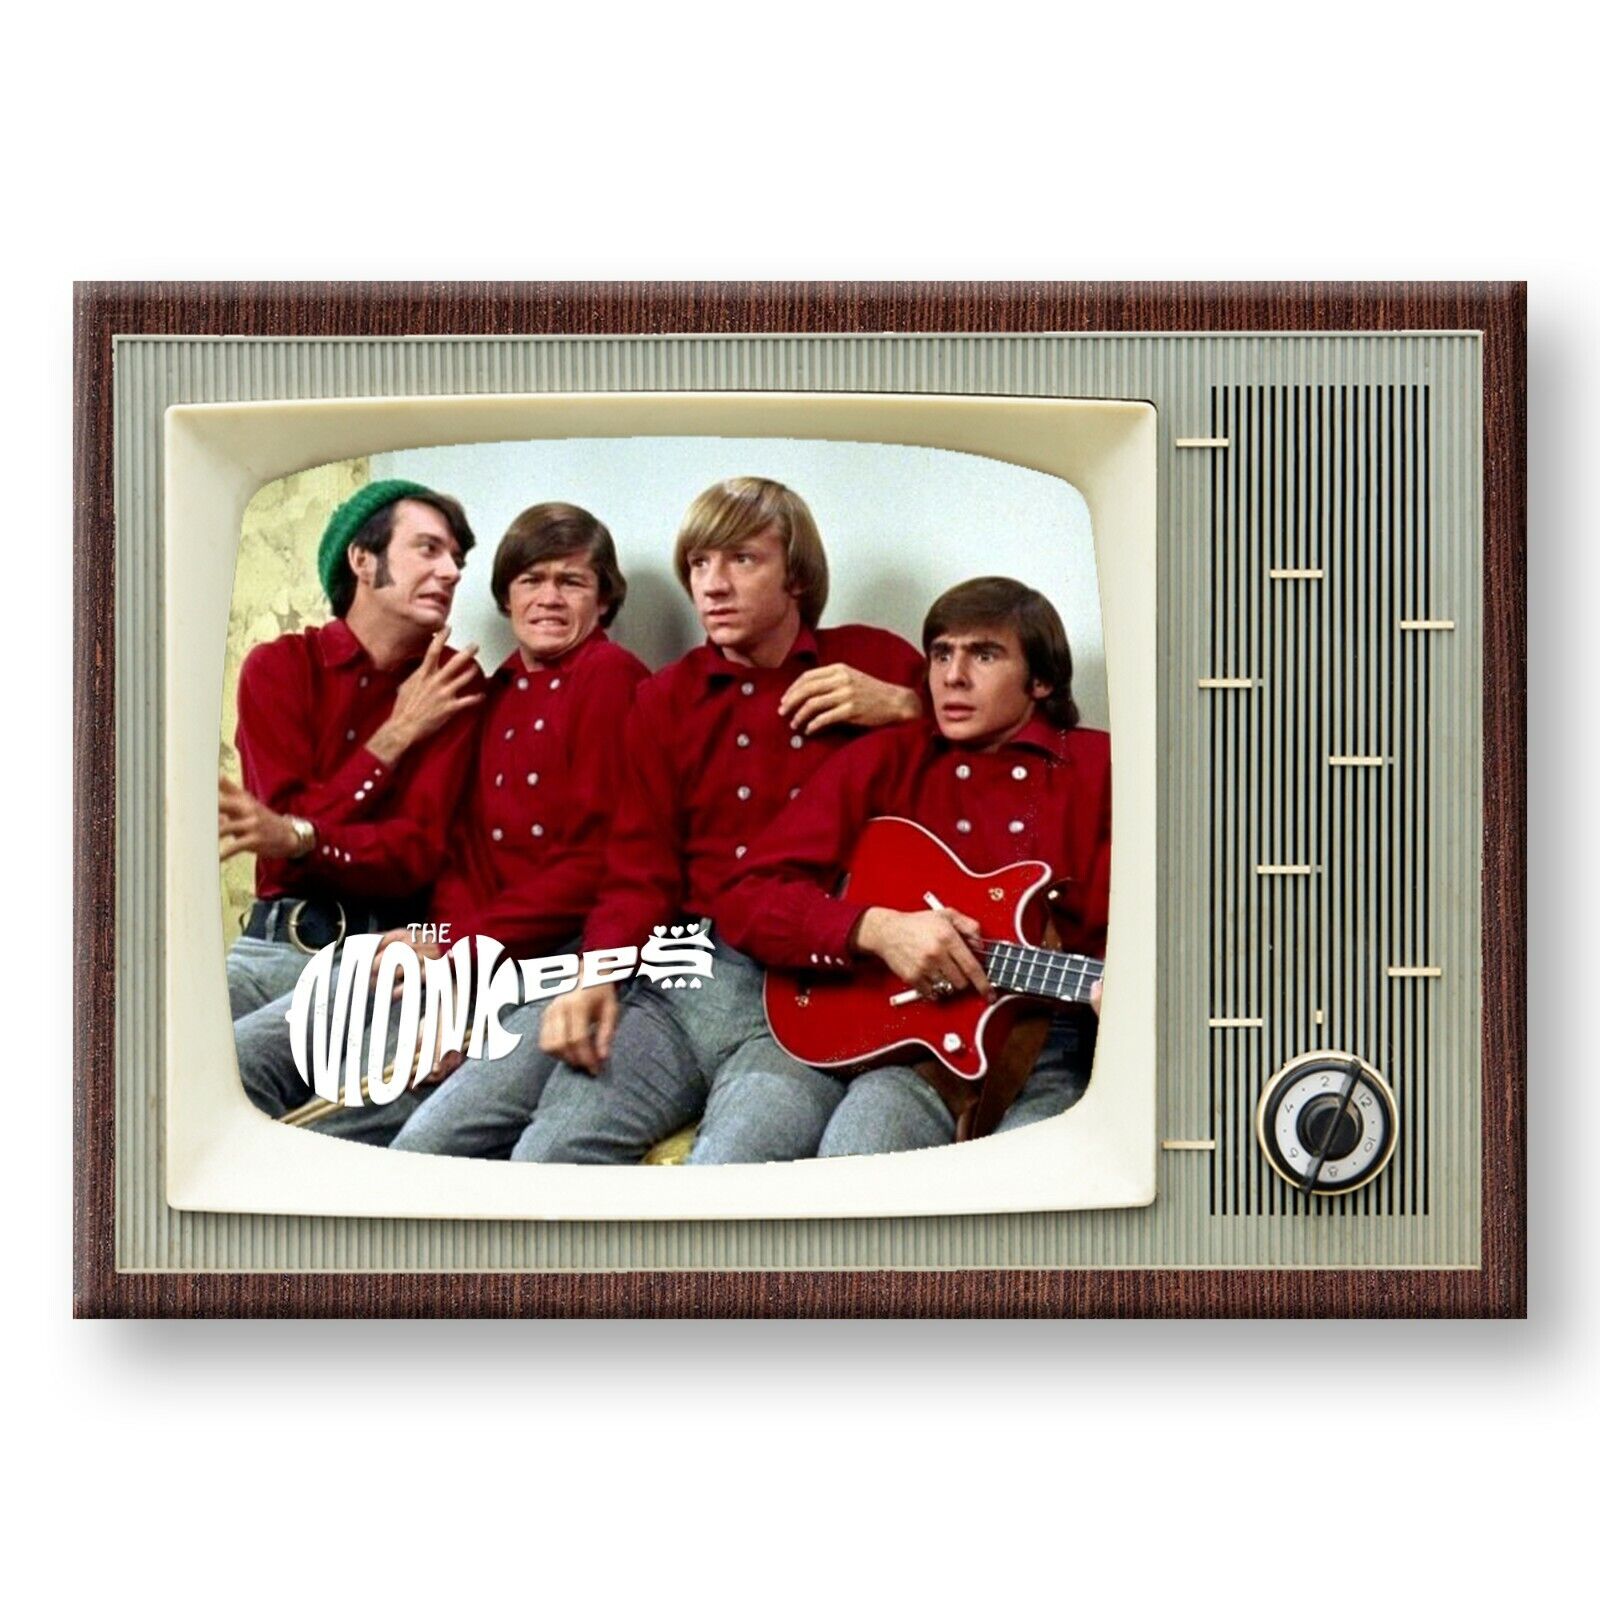 THE MONKEES Classic TV 3.5 inches x 2.5 inches Steel Cased FRIDGE MAGNET